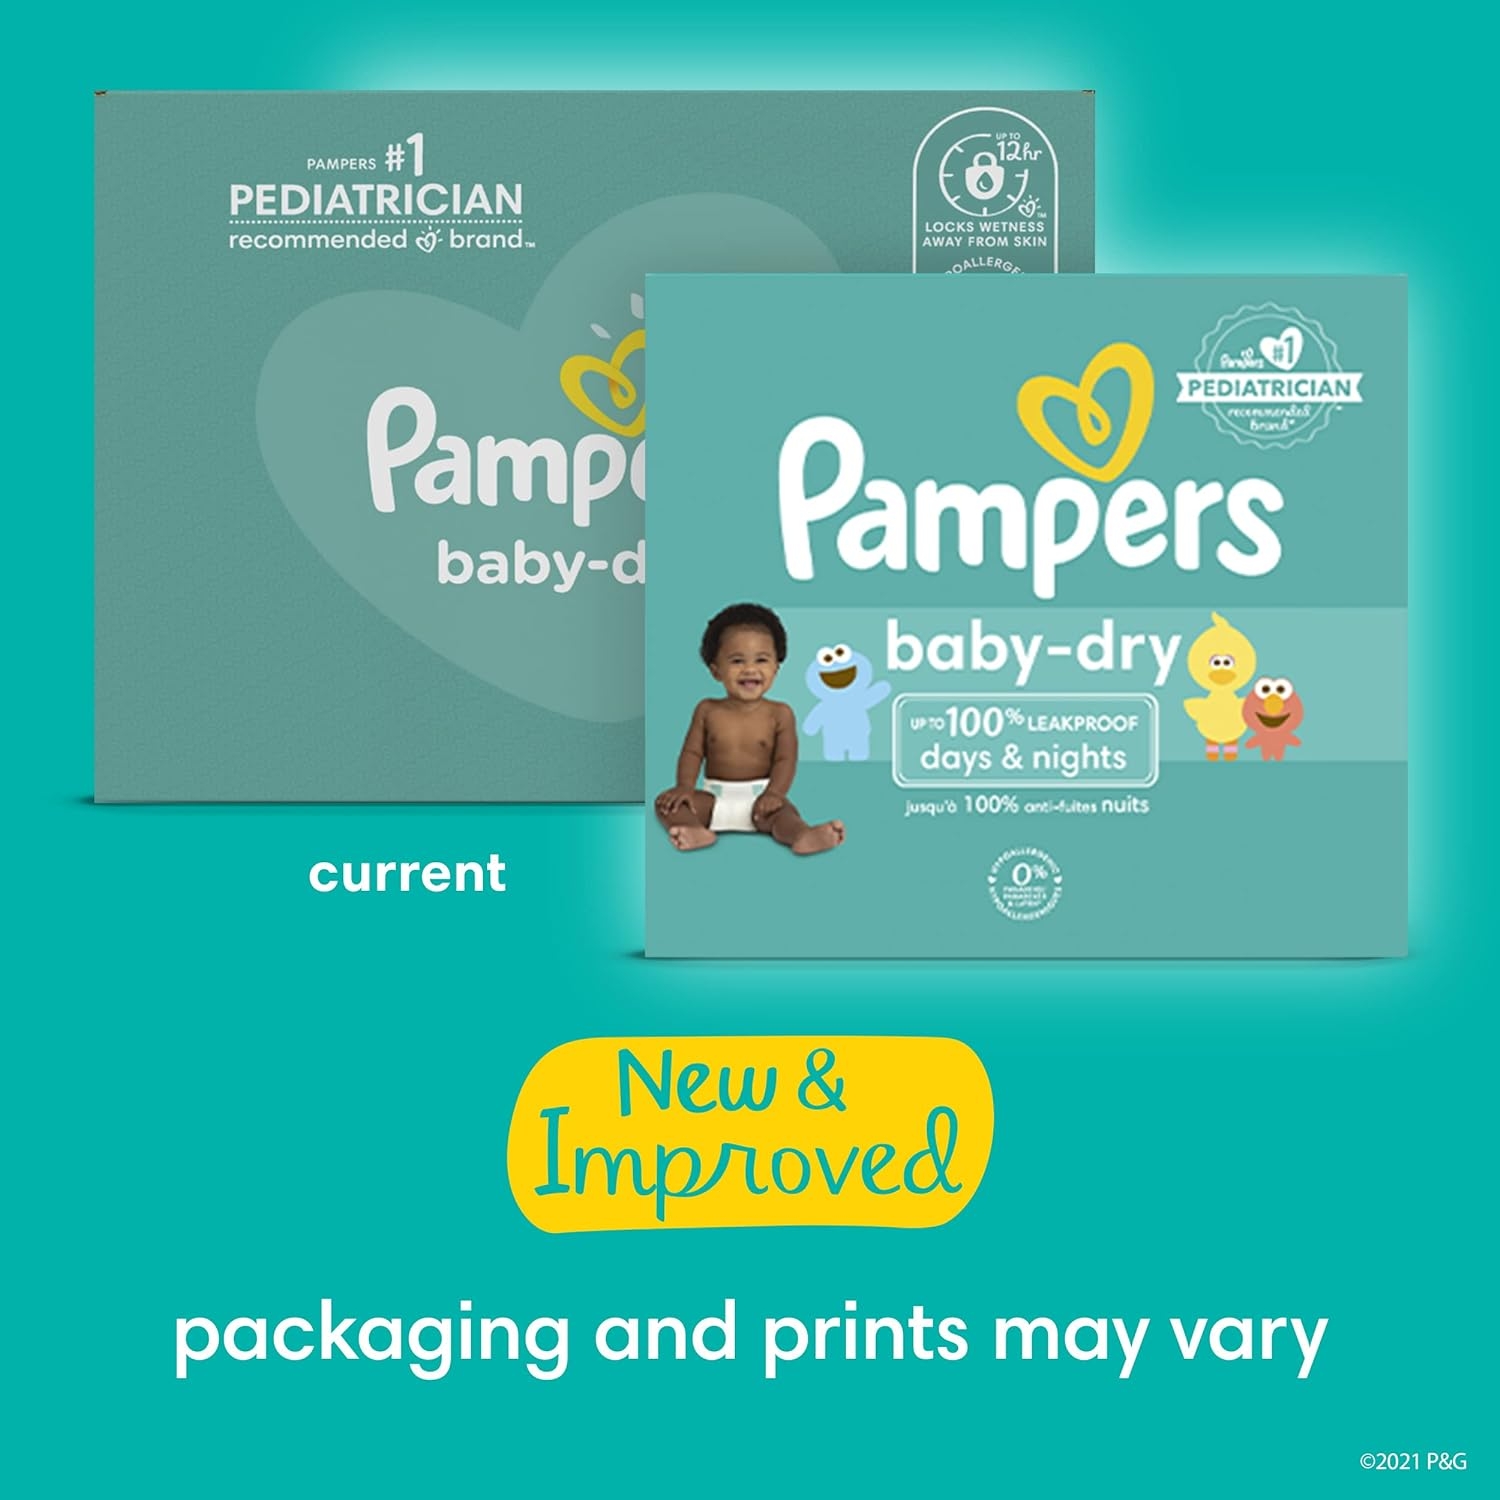 Diapers Size 6, 64 Count - Pampers Baby Dry Disposable Baby Diapers, Super Pack, Packaging & Prints May Vary